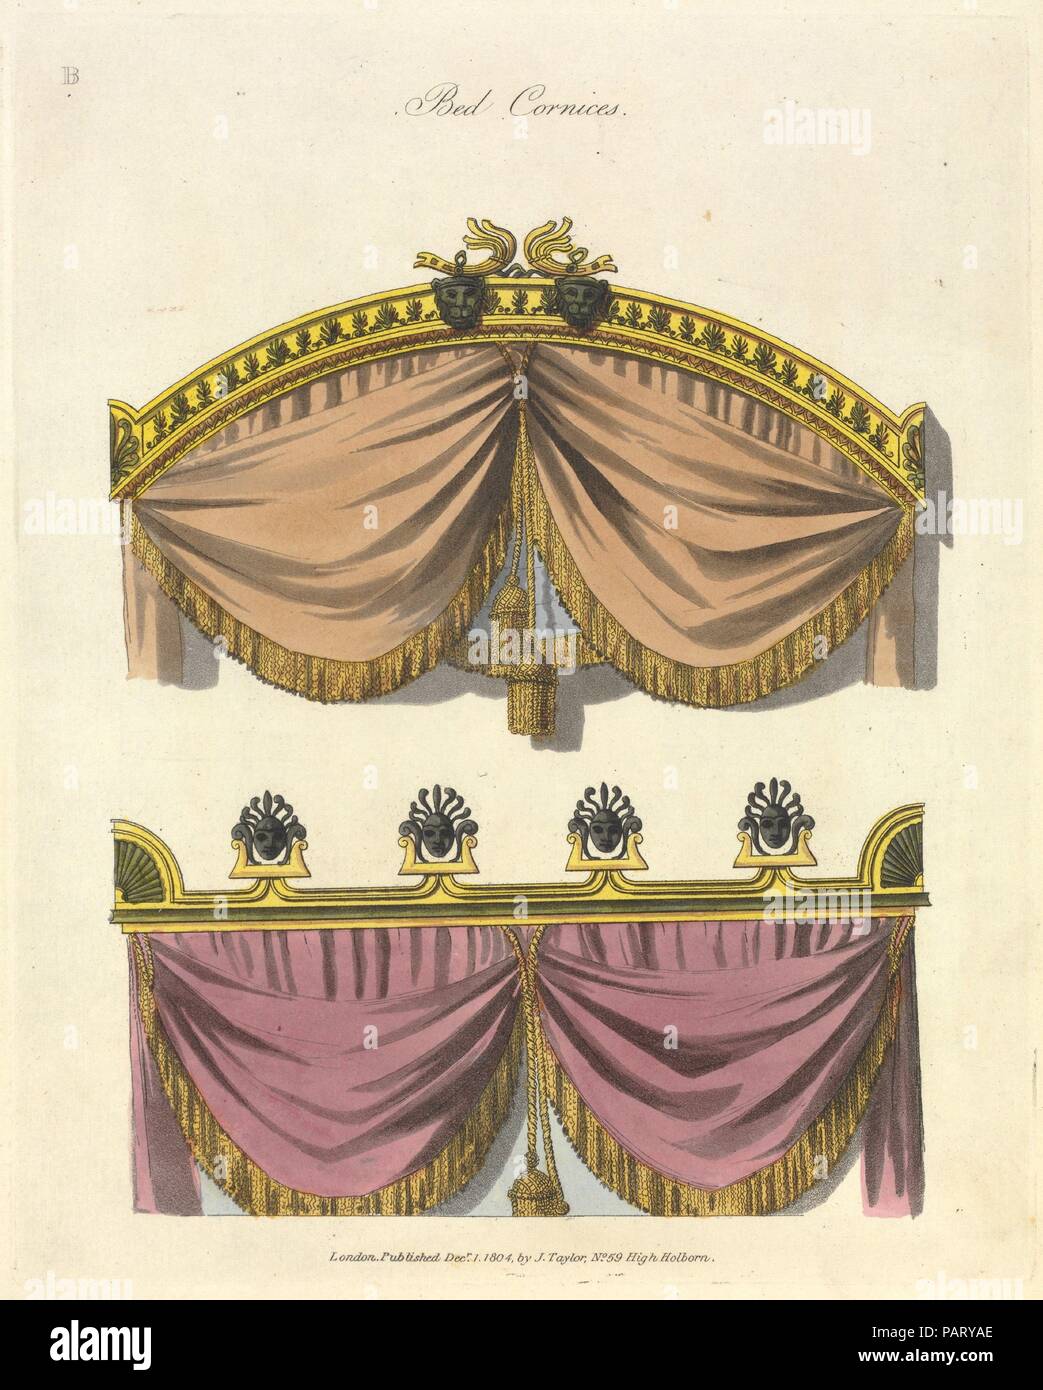 A Collection of Designs for Household Furniture and Interior Decoration, in the most approved and elegant taste. Author: Written and designed by George Smith (British, active London 1808-33). Dimensions: 11 1/16 x 9 1/8 x 1 9/16 in. (28.1 x 23.2 x 4 cm). Printer: S. Gosnell, London. Published in: London. Publisher: J. Taylor (London) at the Architectural Library. Date: 1808. Museum: Metropolitan Museum of Art, New York, USA. Stock Photo